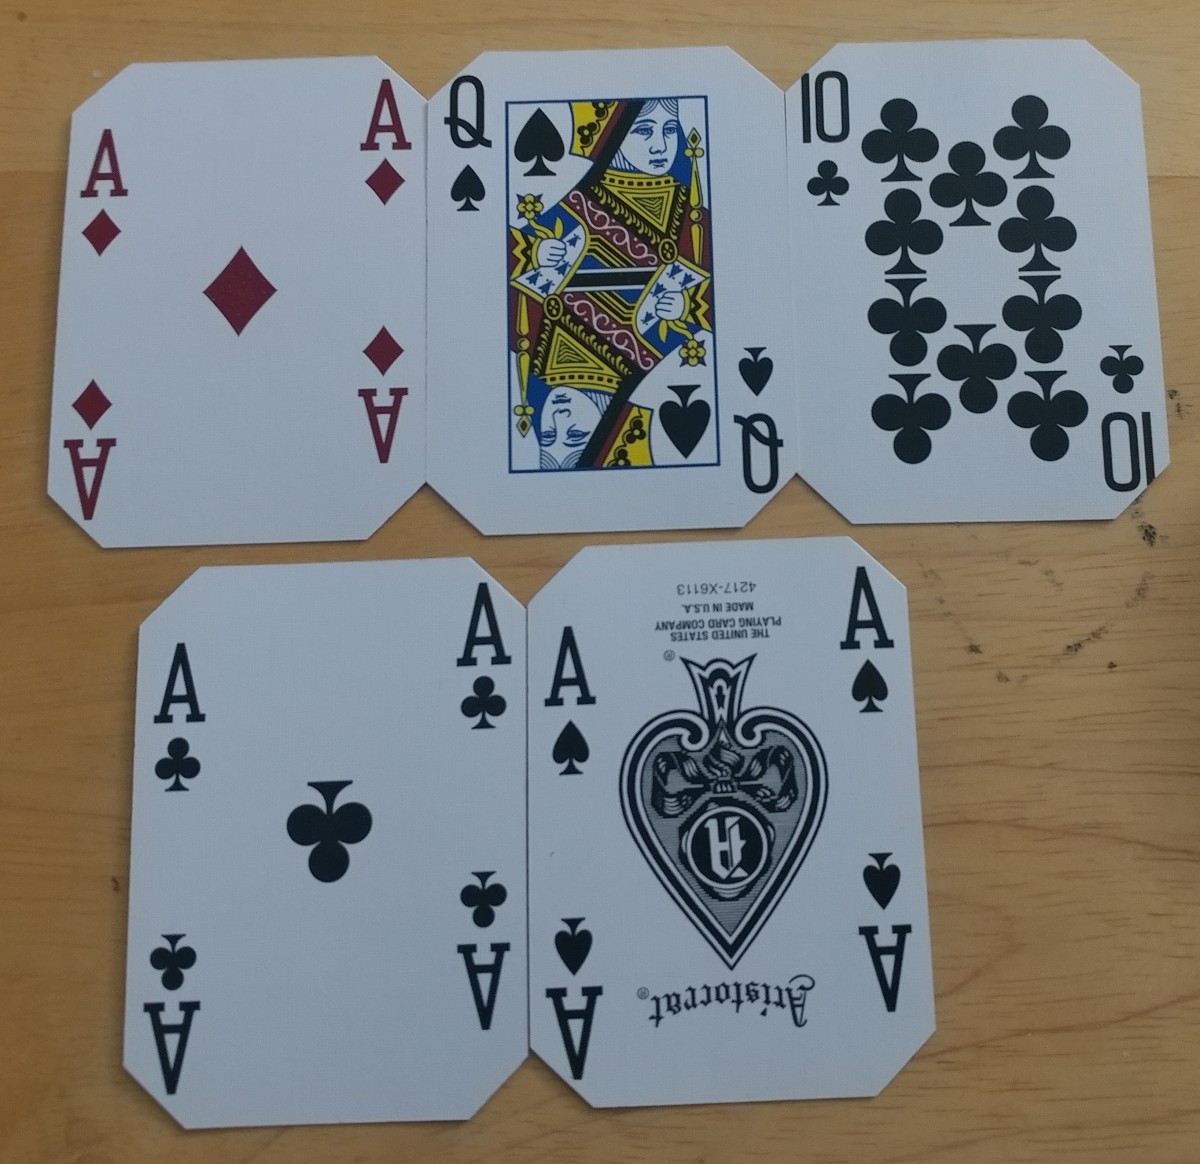 This is an example of a poker set.